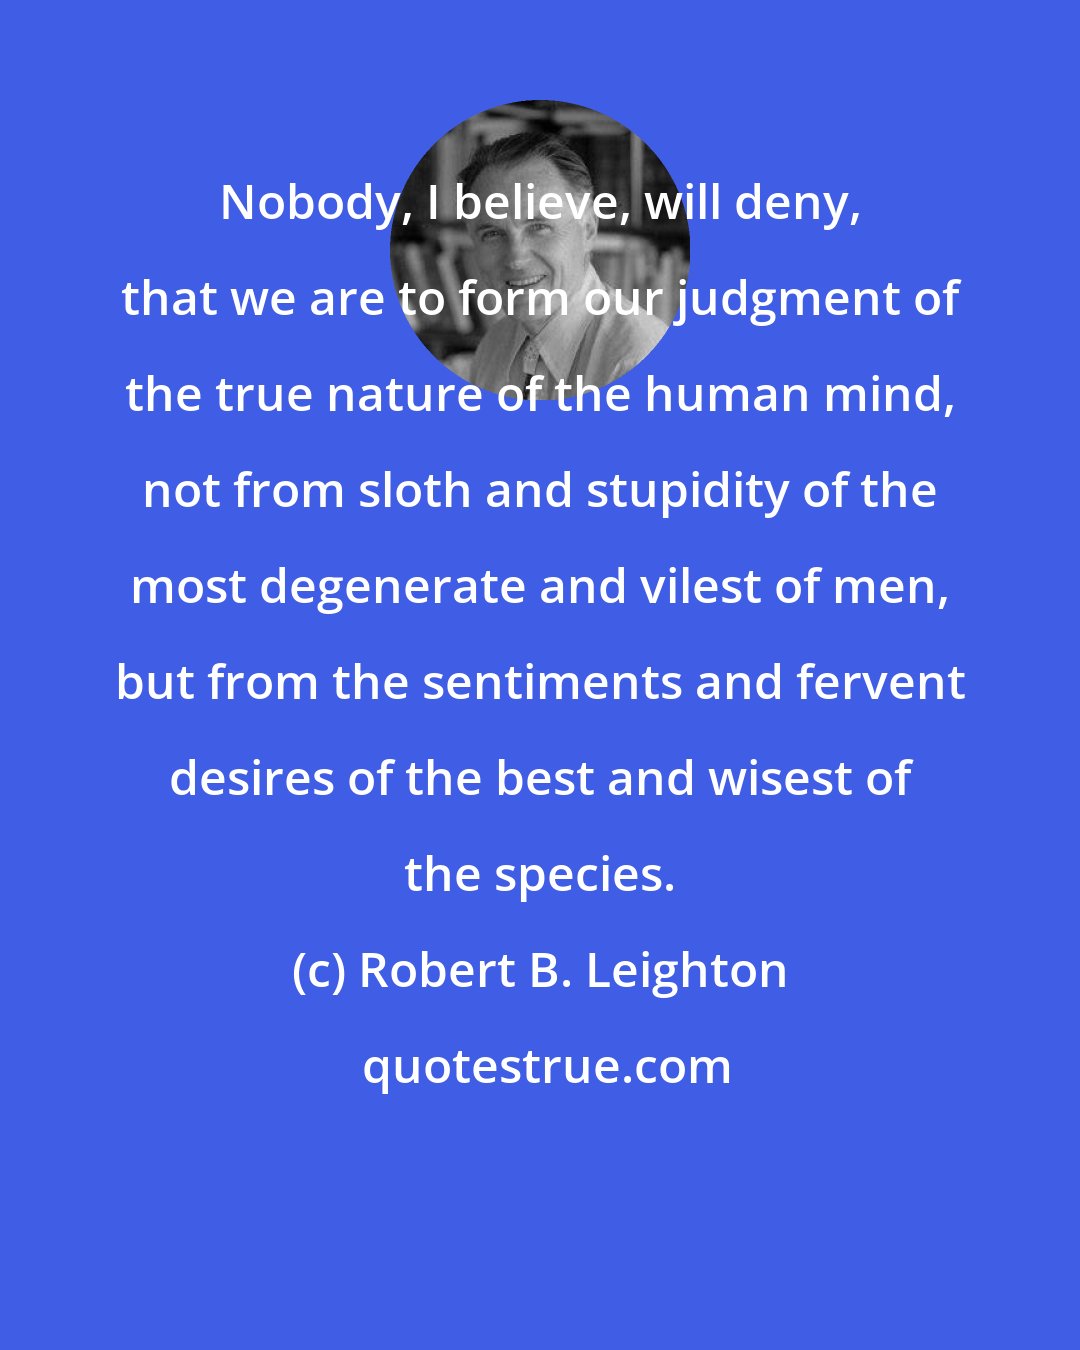 Robert B. Leighton: Nobody, I believe, will deny, that we are to form our judgment of the true nature of the human mind, not from sloth and stupidity of the most degenerate and vilest of men, but from the sentiments and fervent desires of the best and wisest of the species.